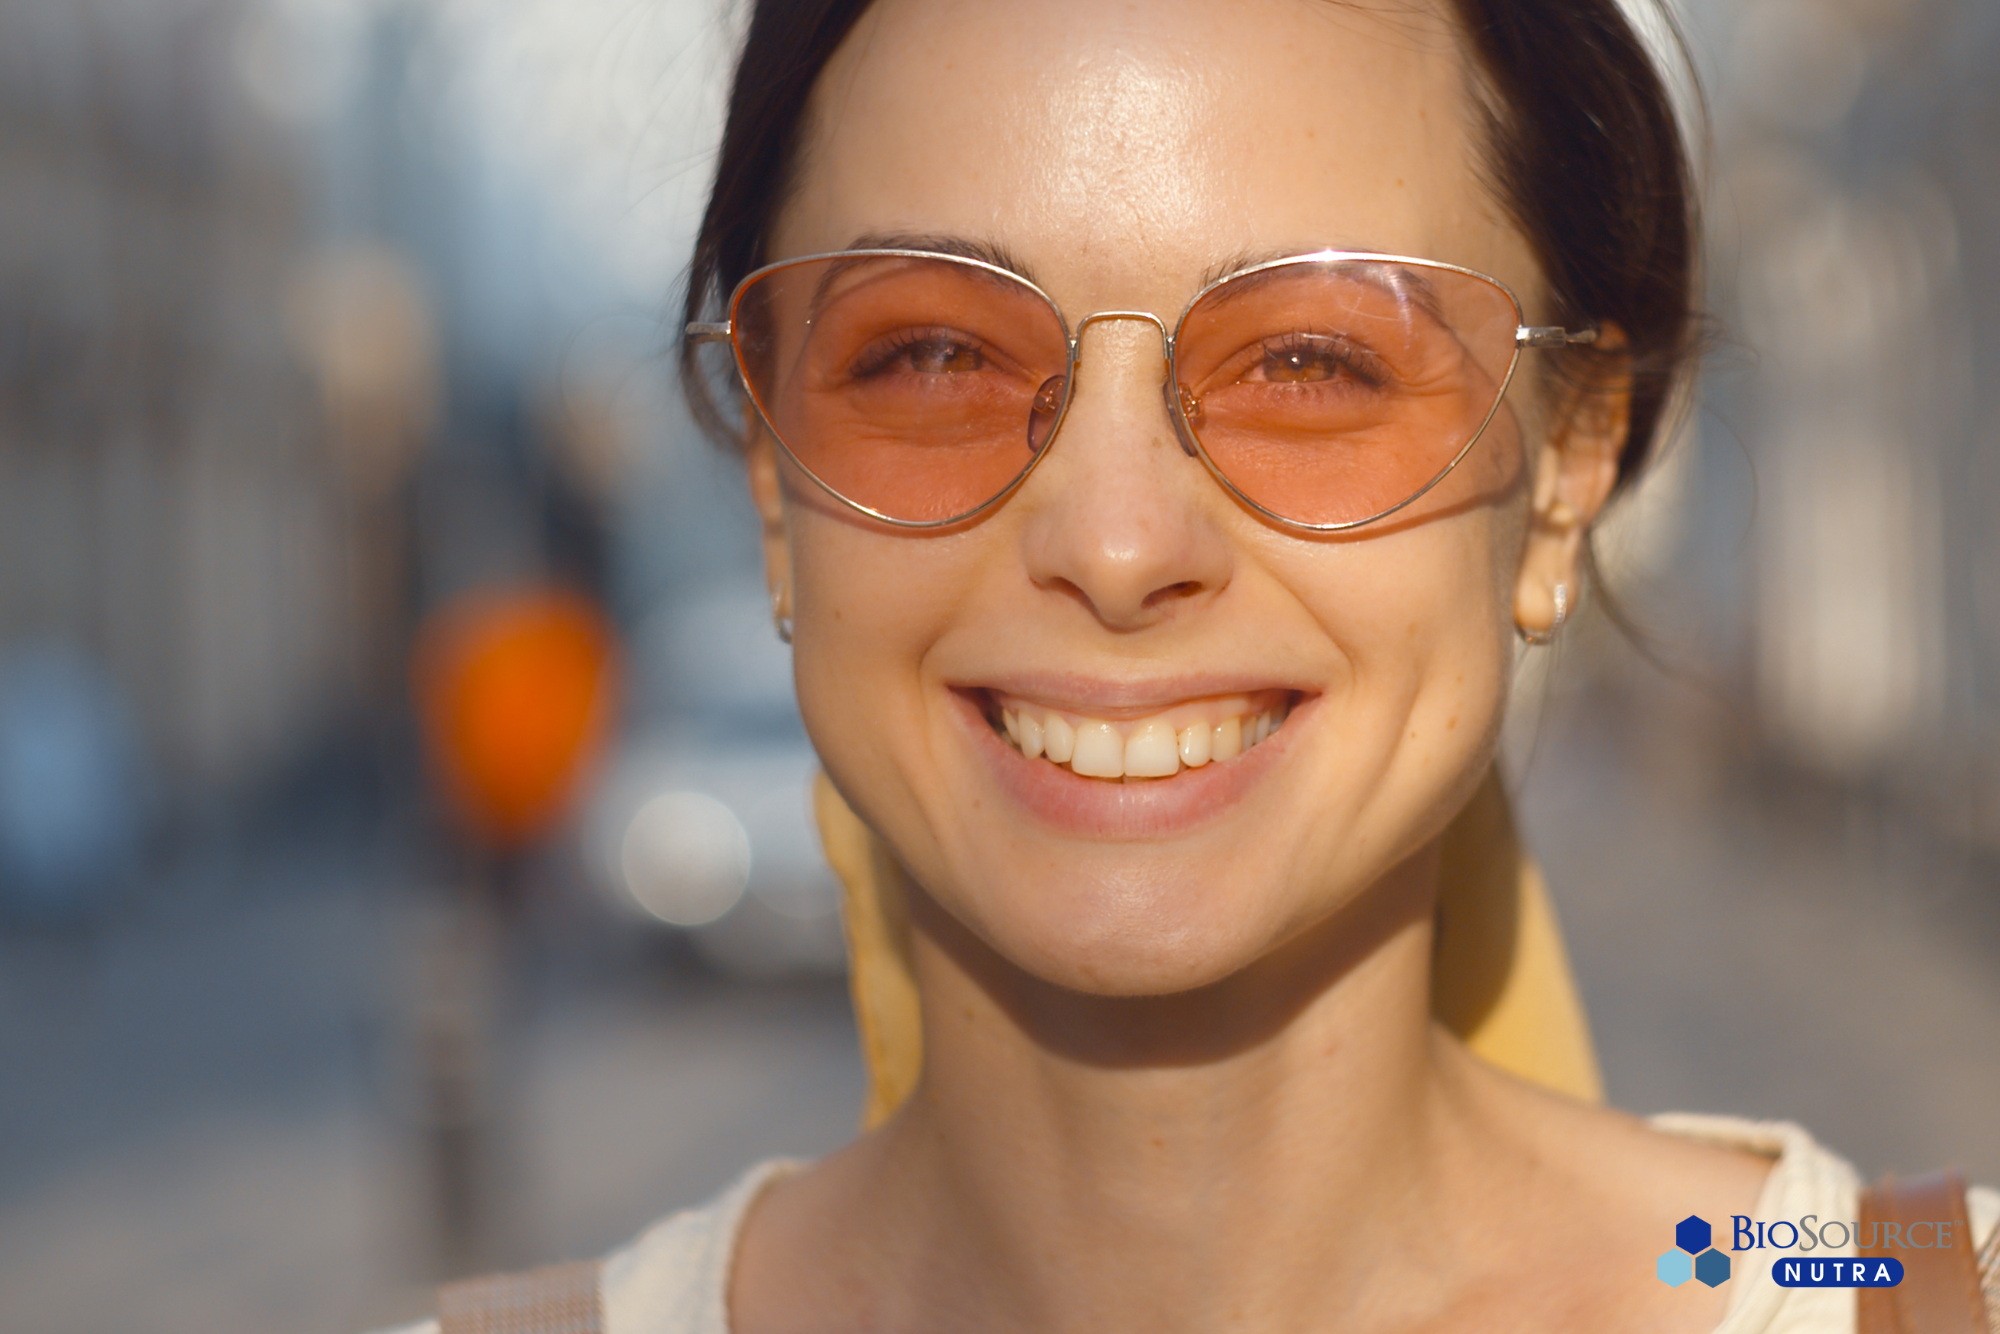 A young woman wearing orange tinted sunglasses is smiling in the sun